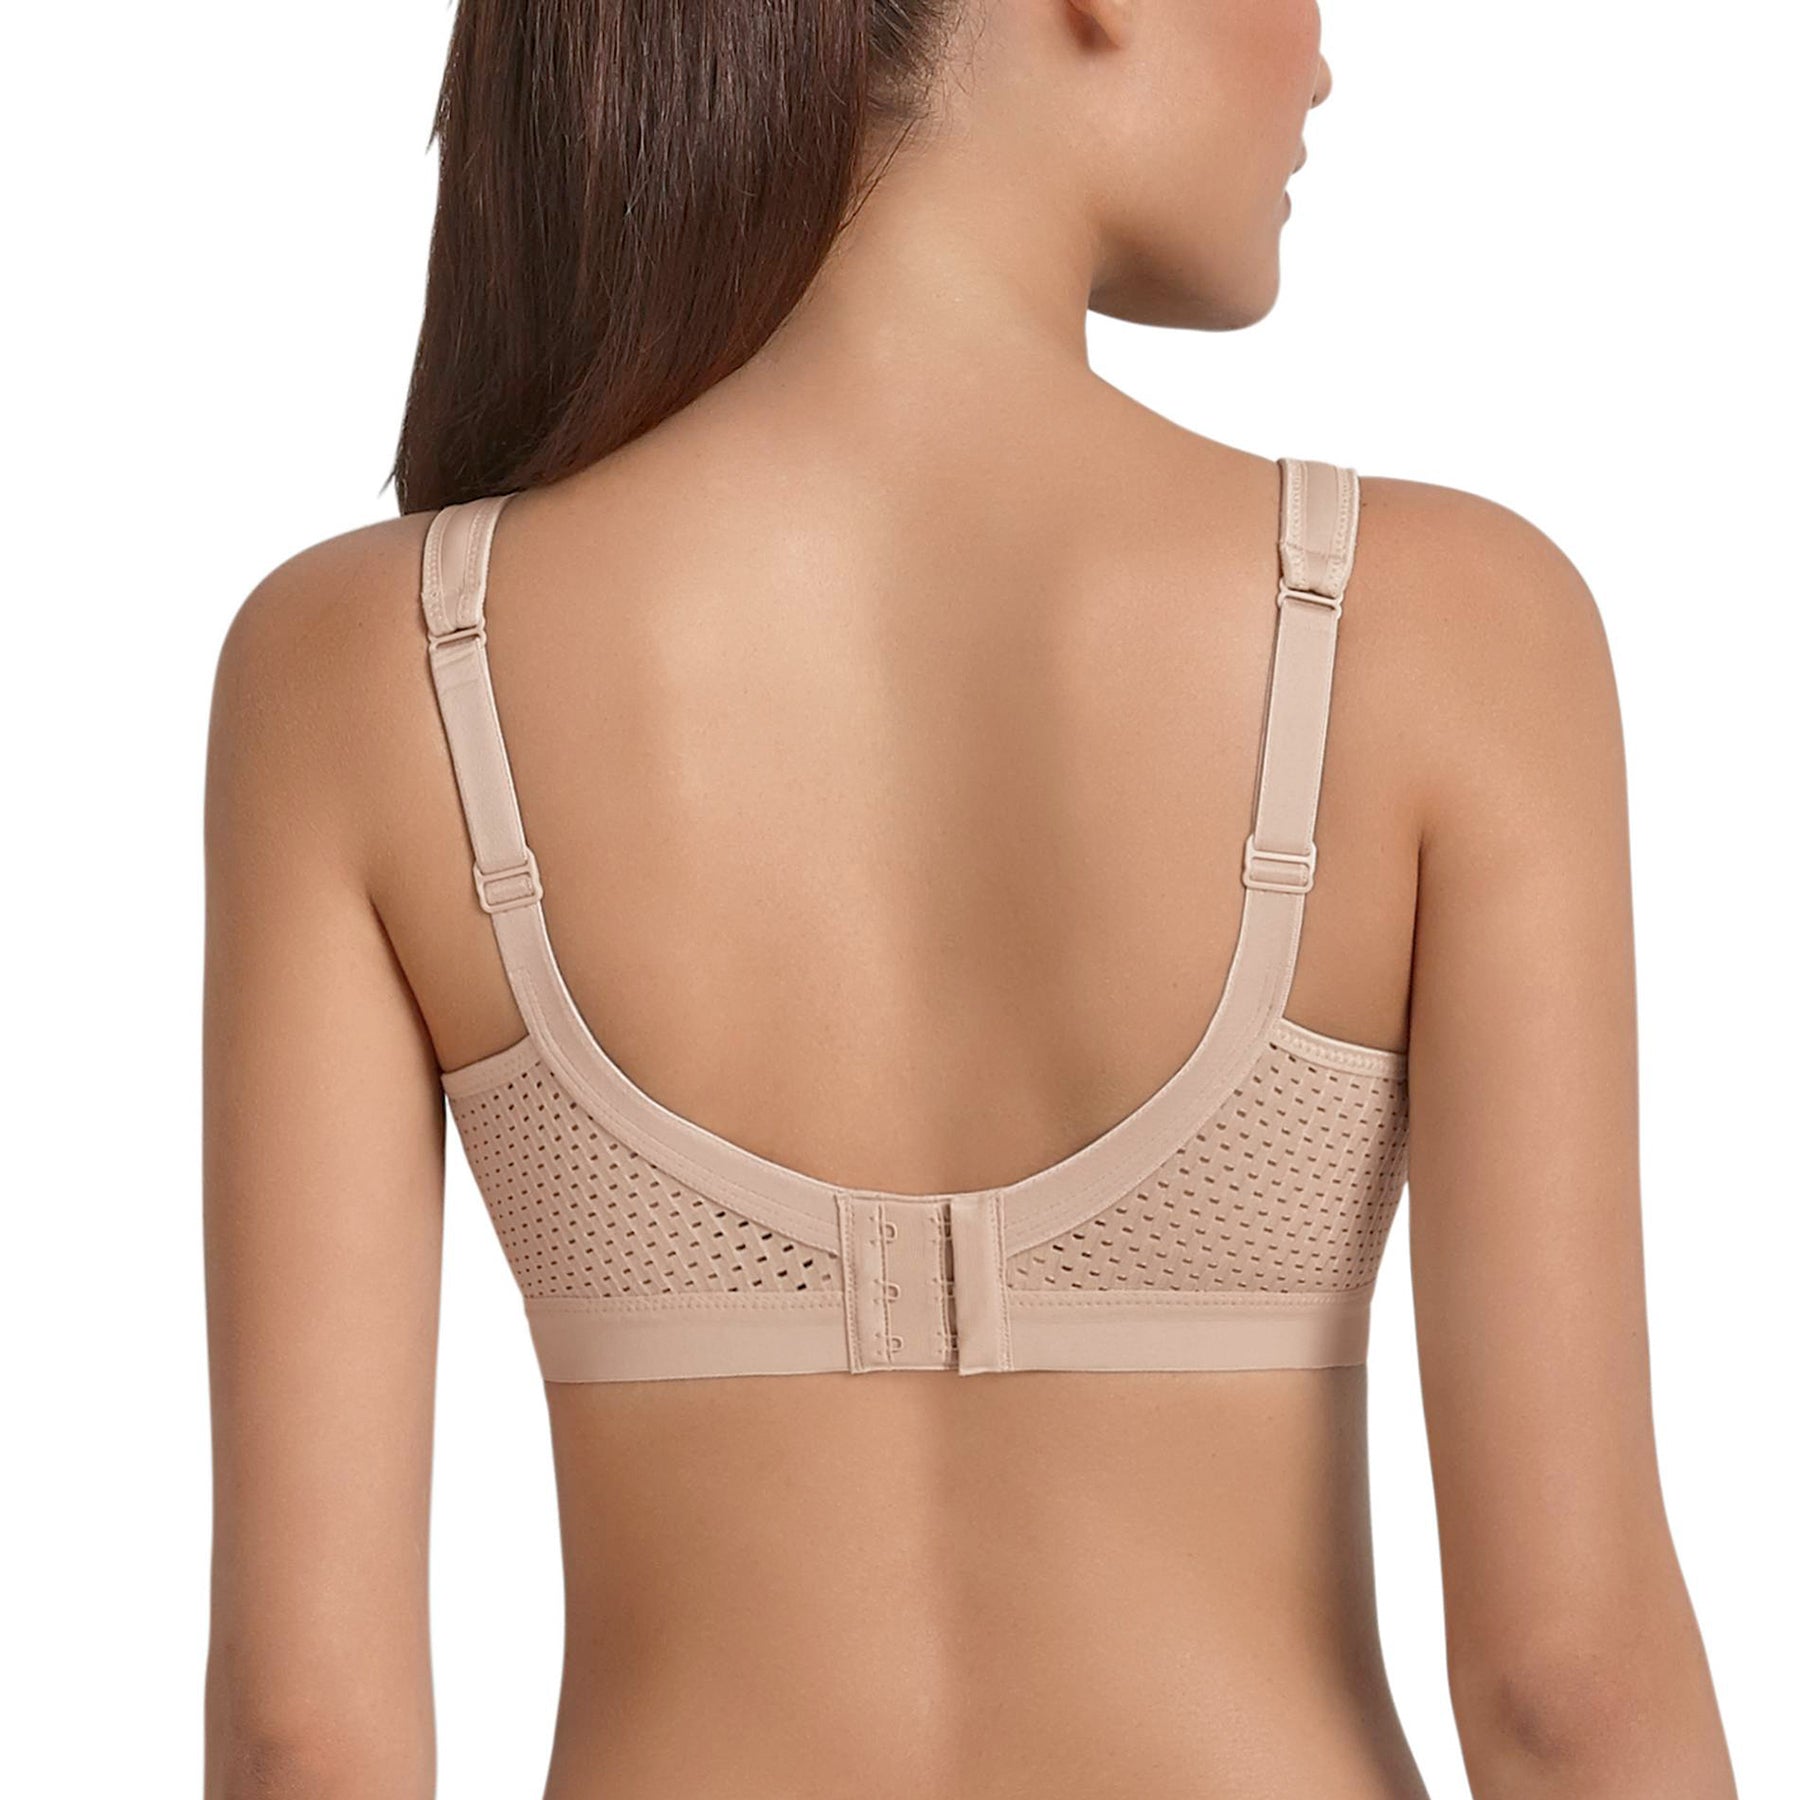 Shop Women's Dkny Lace Bras up to 70% Off